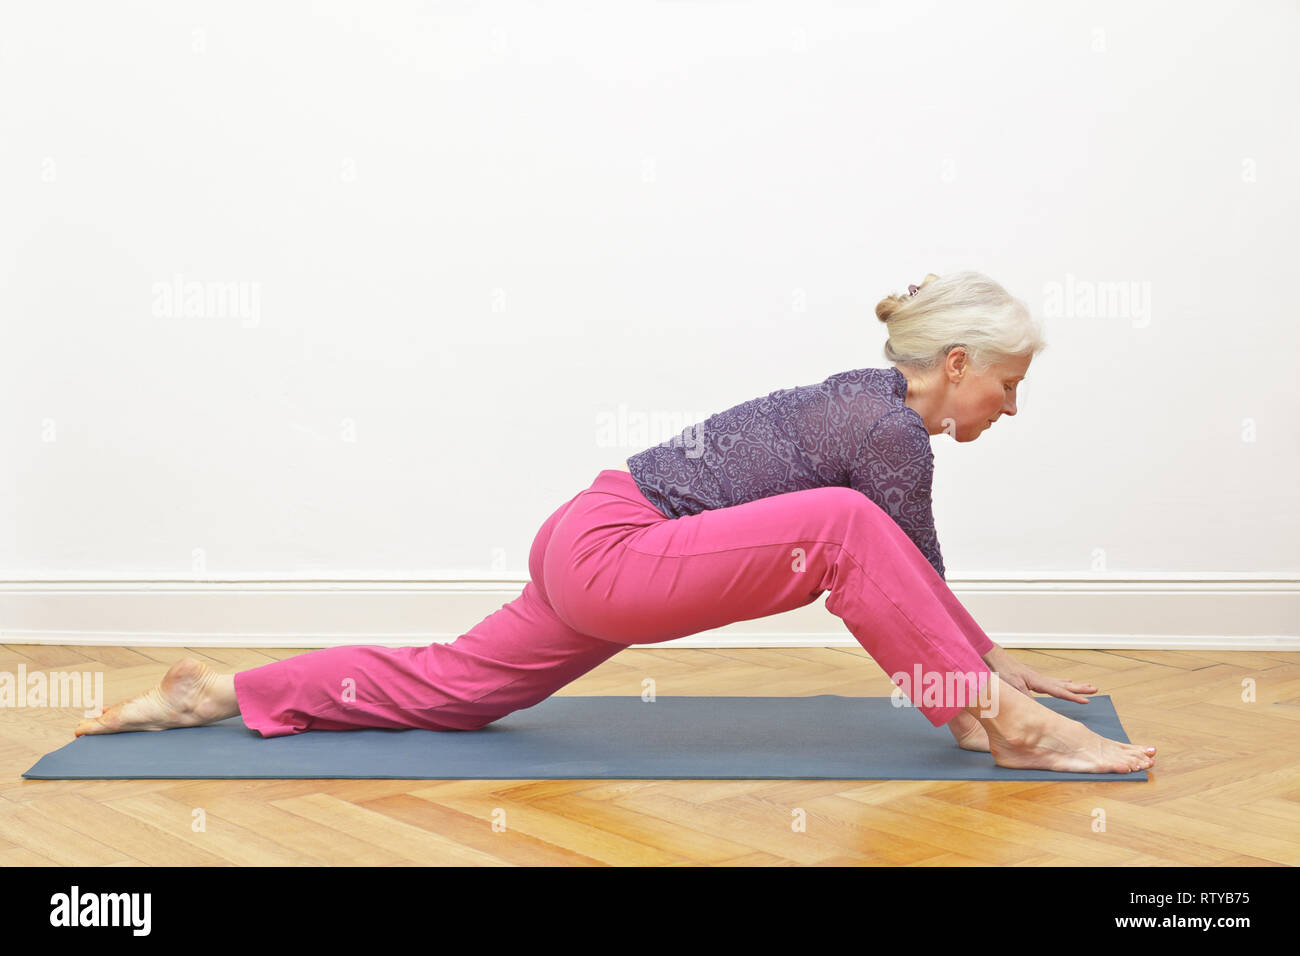 Senior woman with gray hair doing yoga exercise at home in front of a white wall, position dragon intro Stock Photo